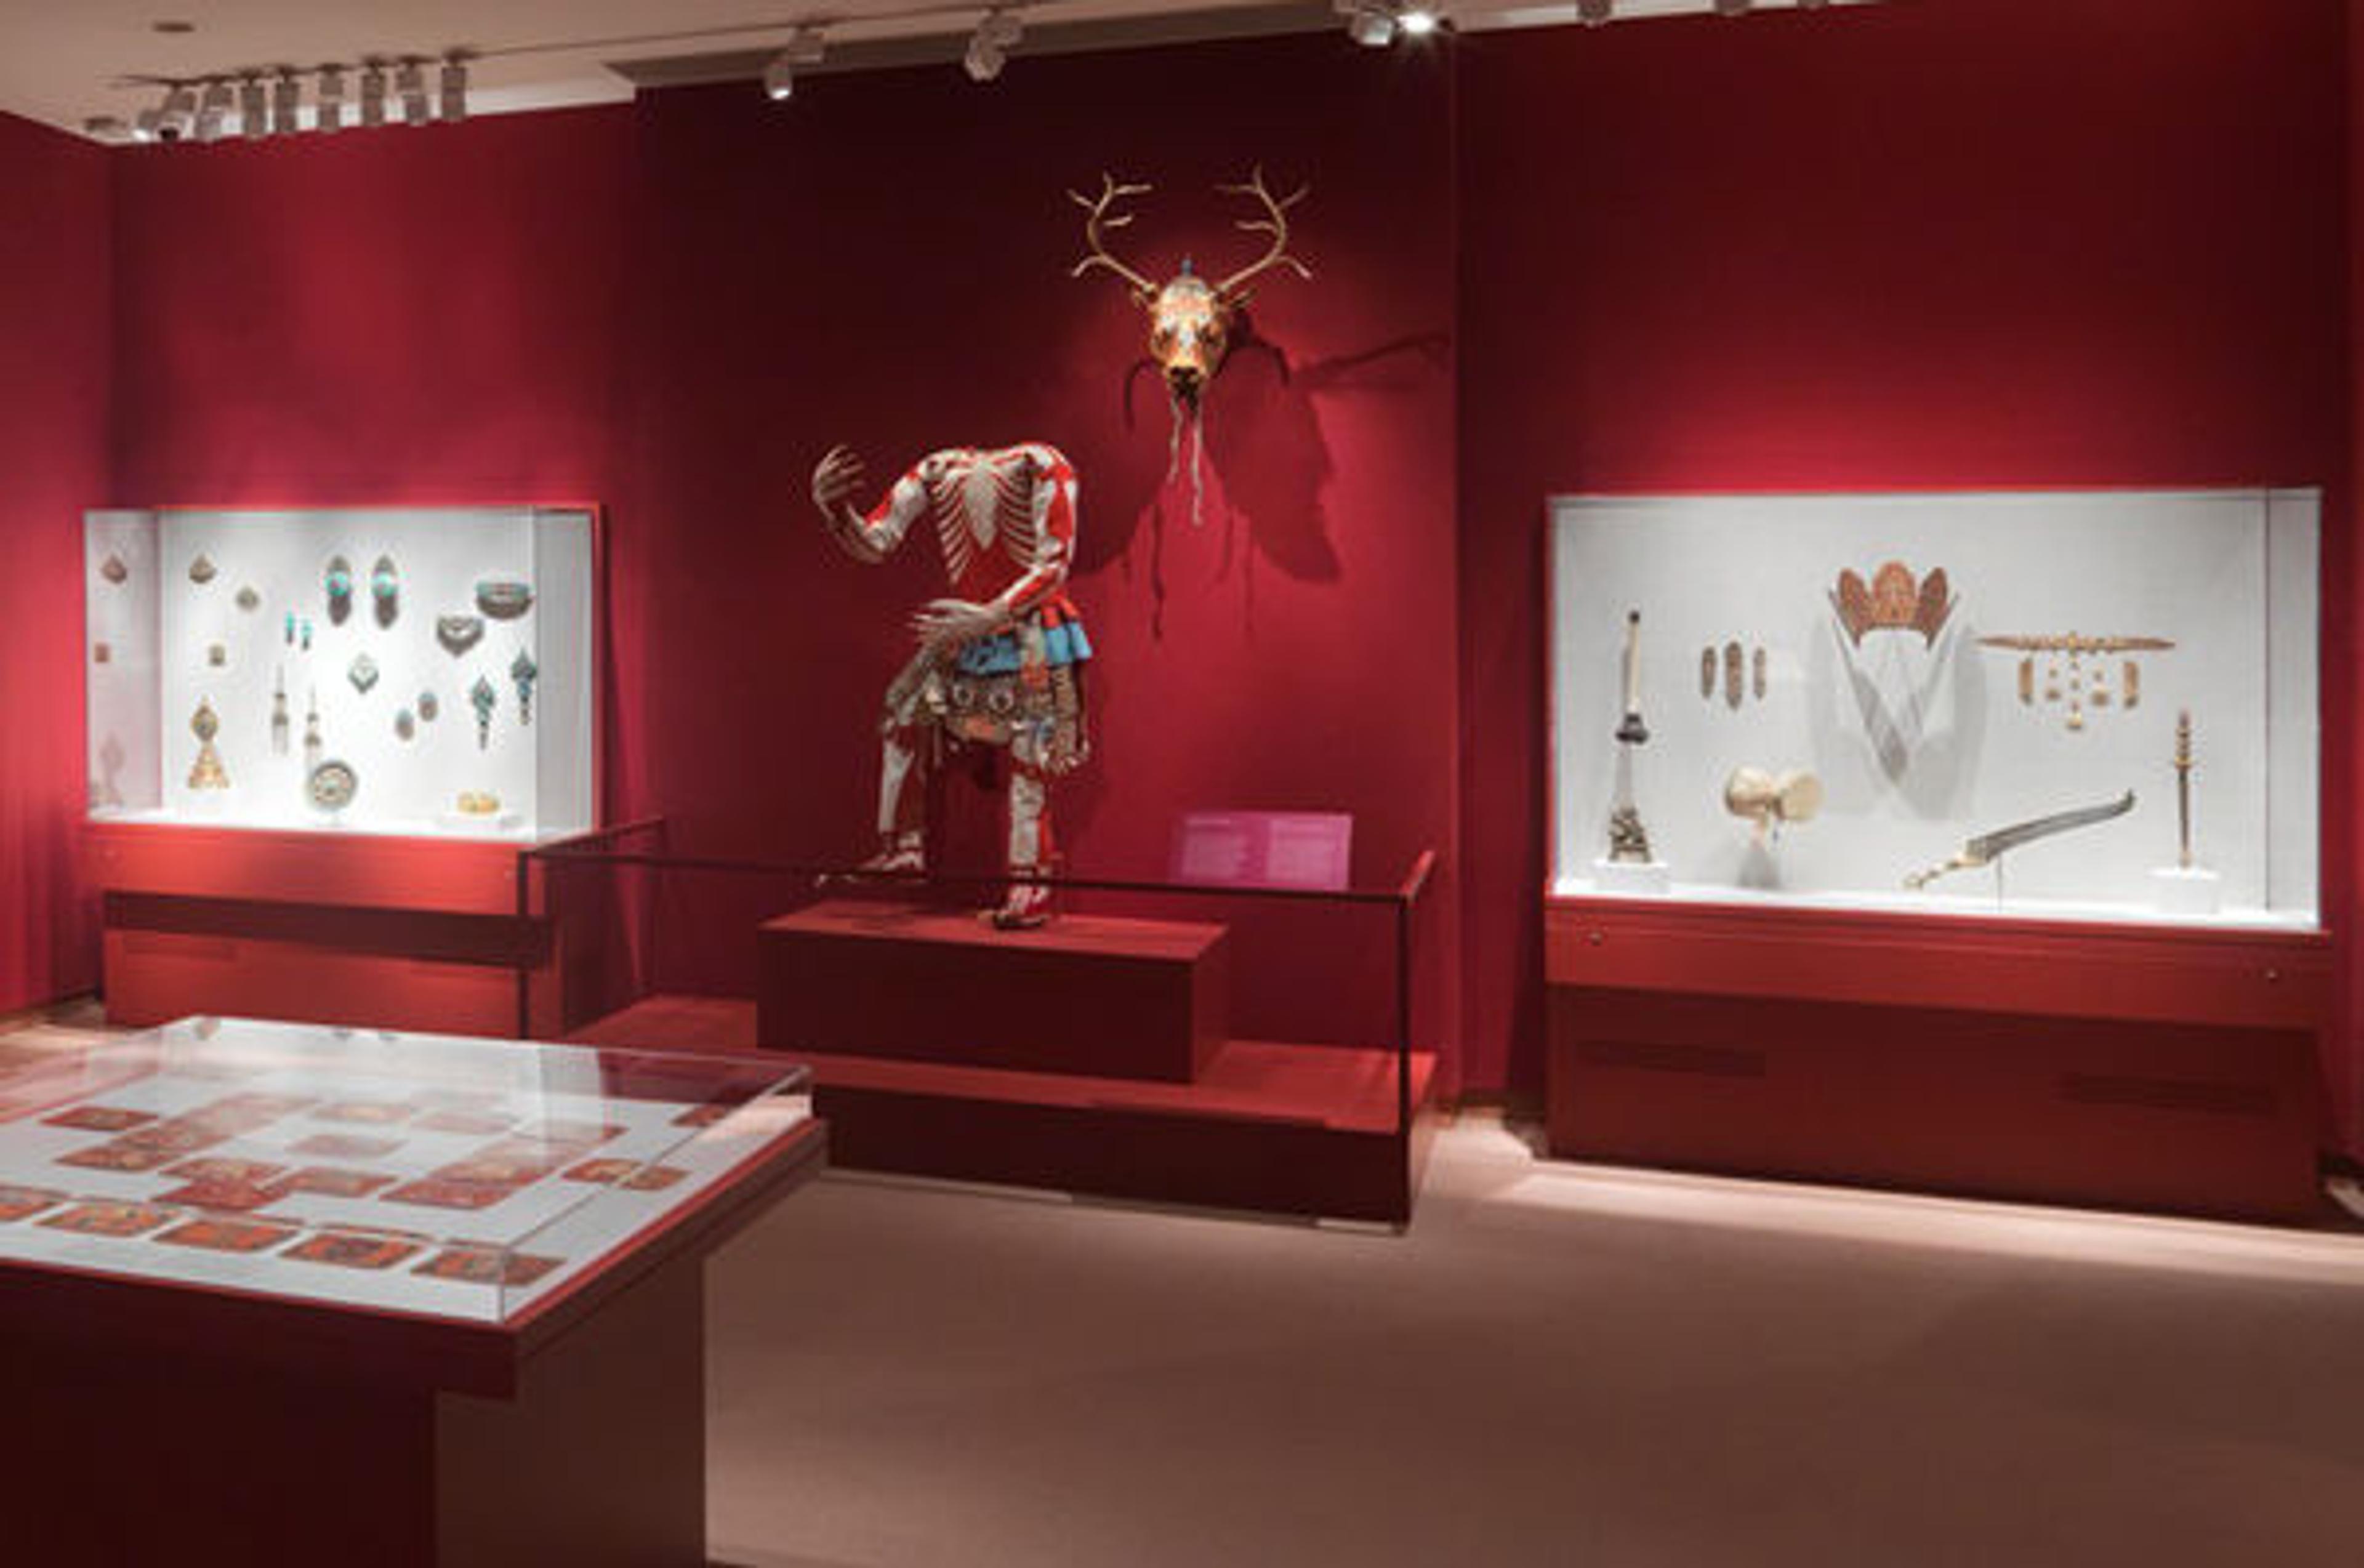 The special exhibition Sacred Traditions of the Himalayas, on view through June 14, 2015, in gallery 251